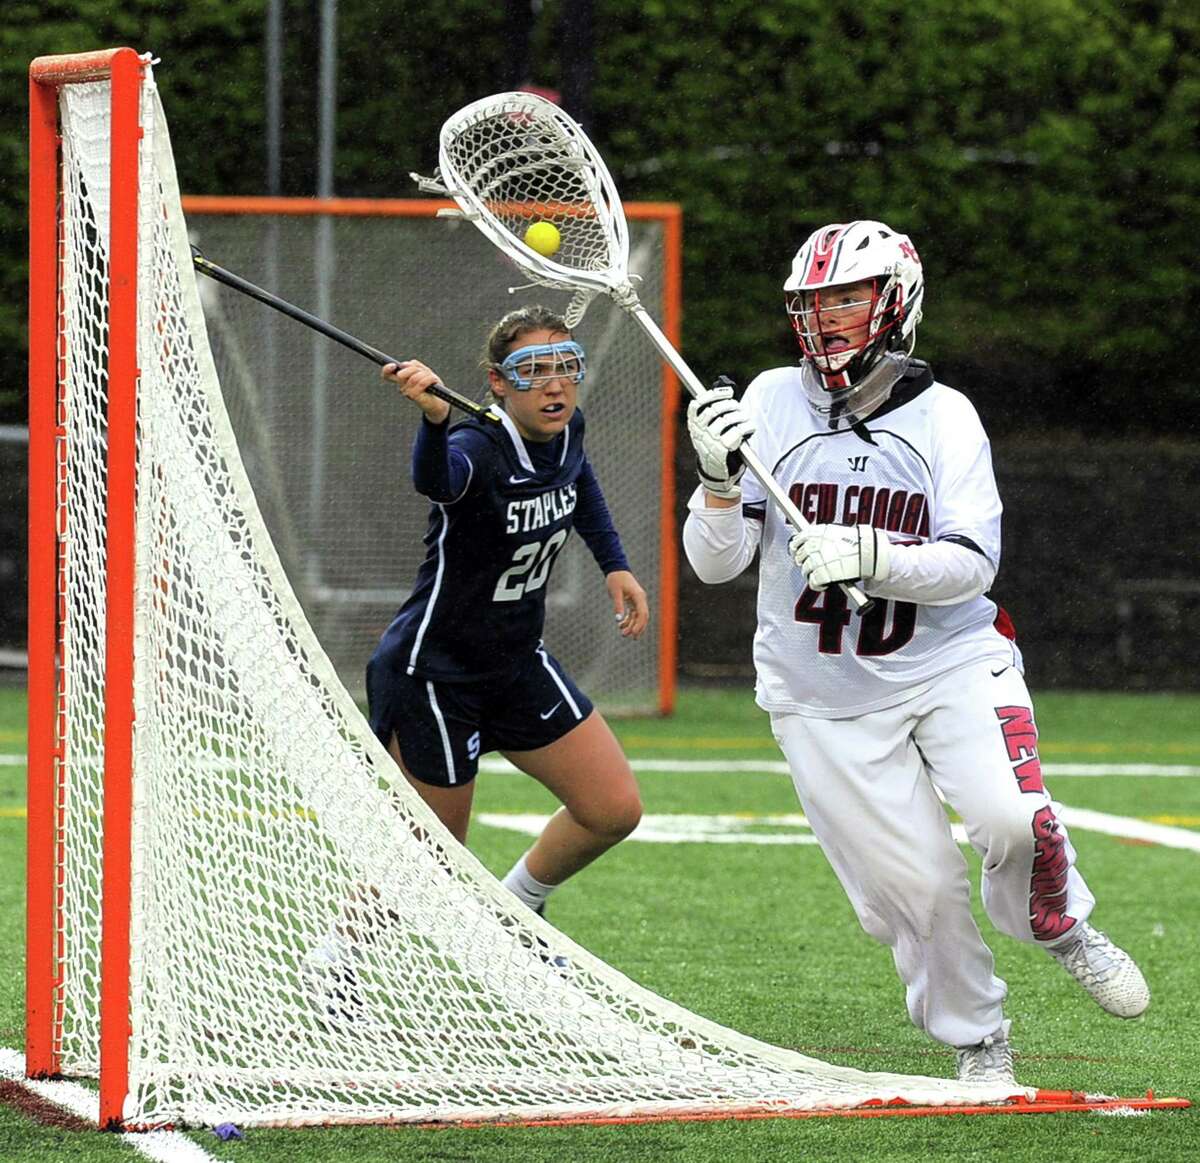 New Canaan goalie Caroline O'Dea looks to pass forward following a save against Staples in a varsity girls lacrosse game at New Canaan High School Dunning Field on Tuesday, April 25, 2017. New Canaan defeated Staples 16-8.